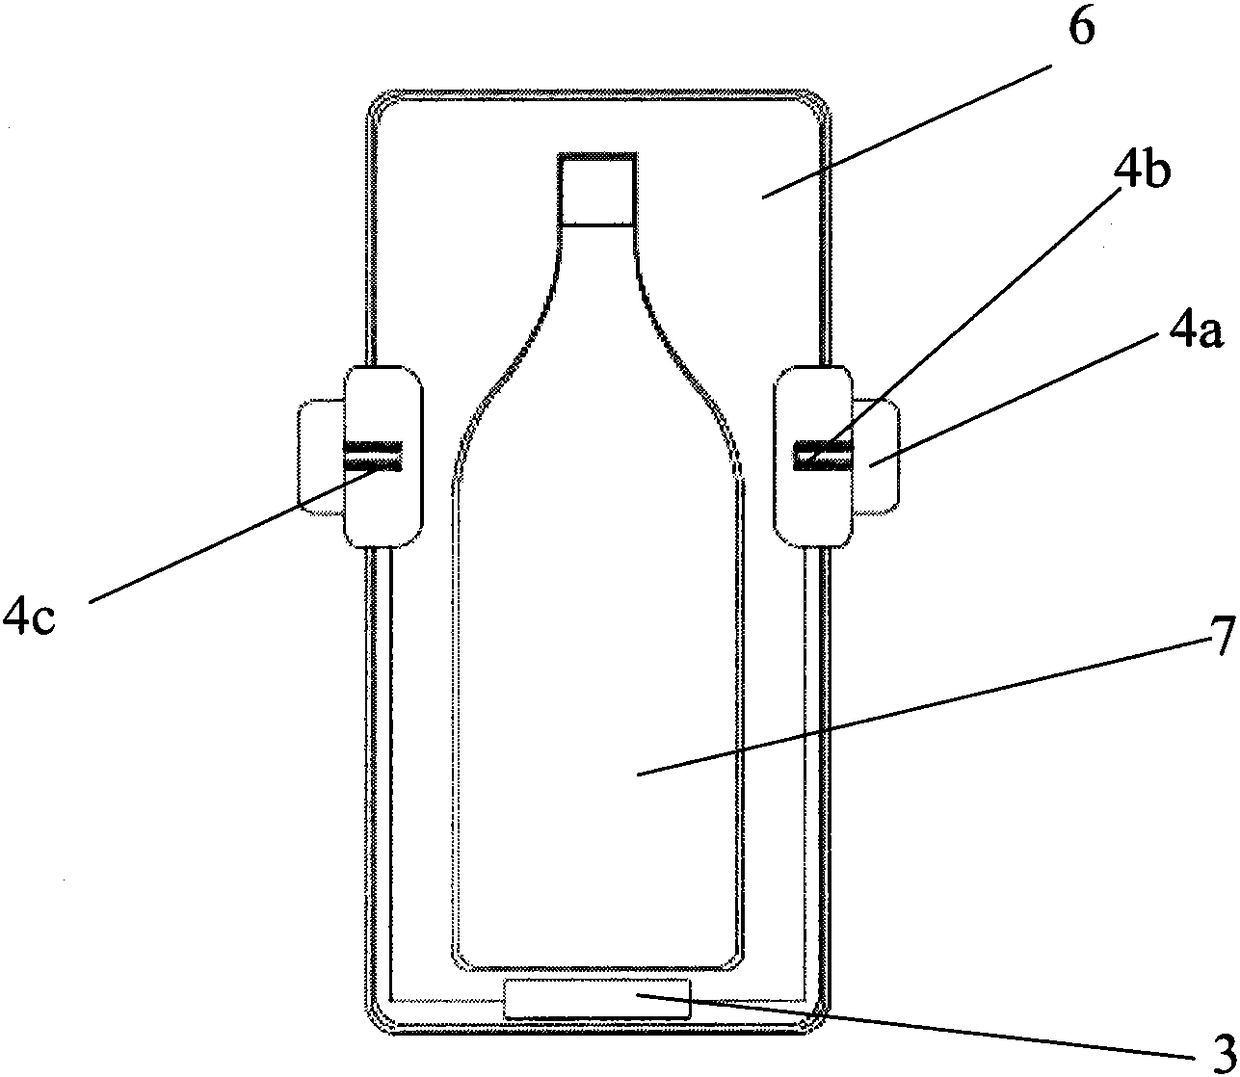 Anti-counterfeiting wine packaging and its application method based on Internet of Things